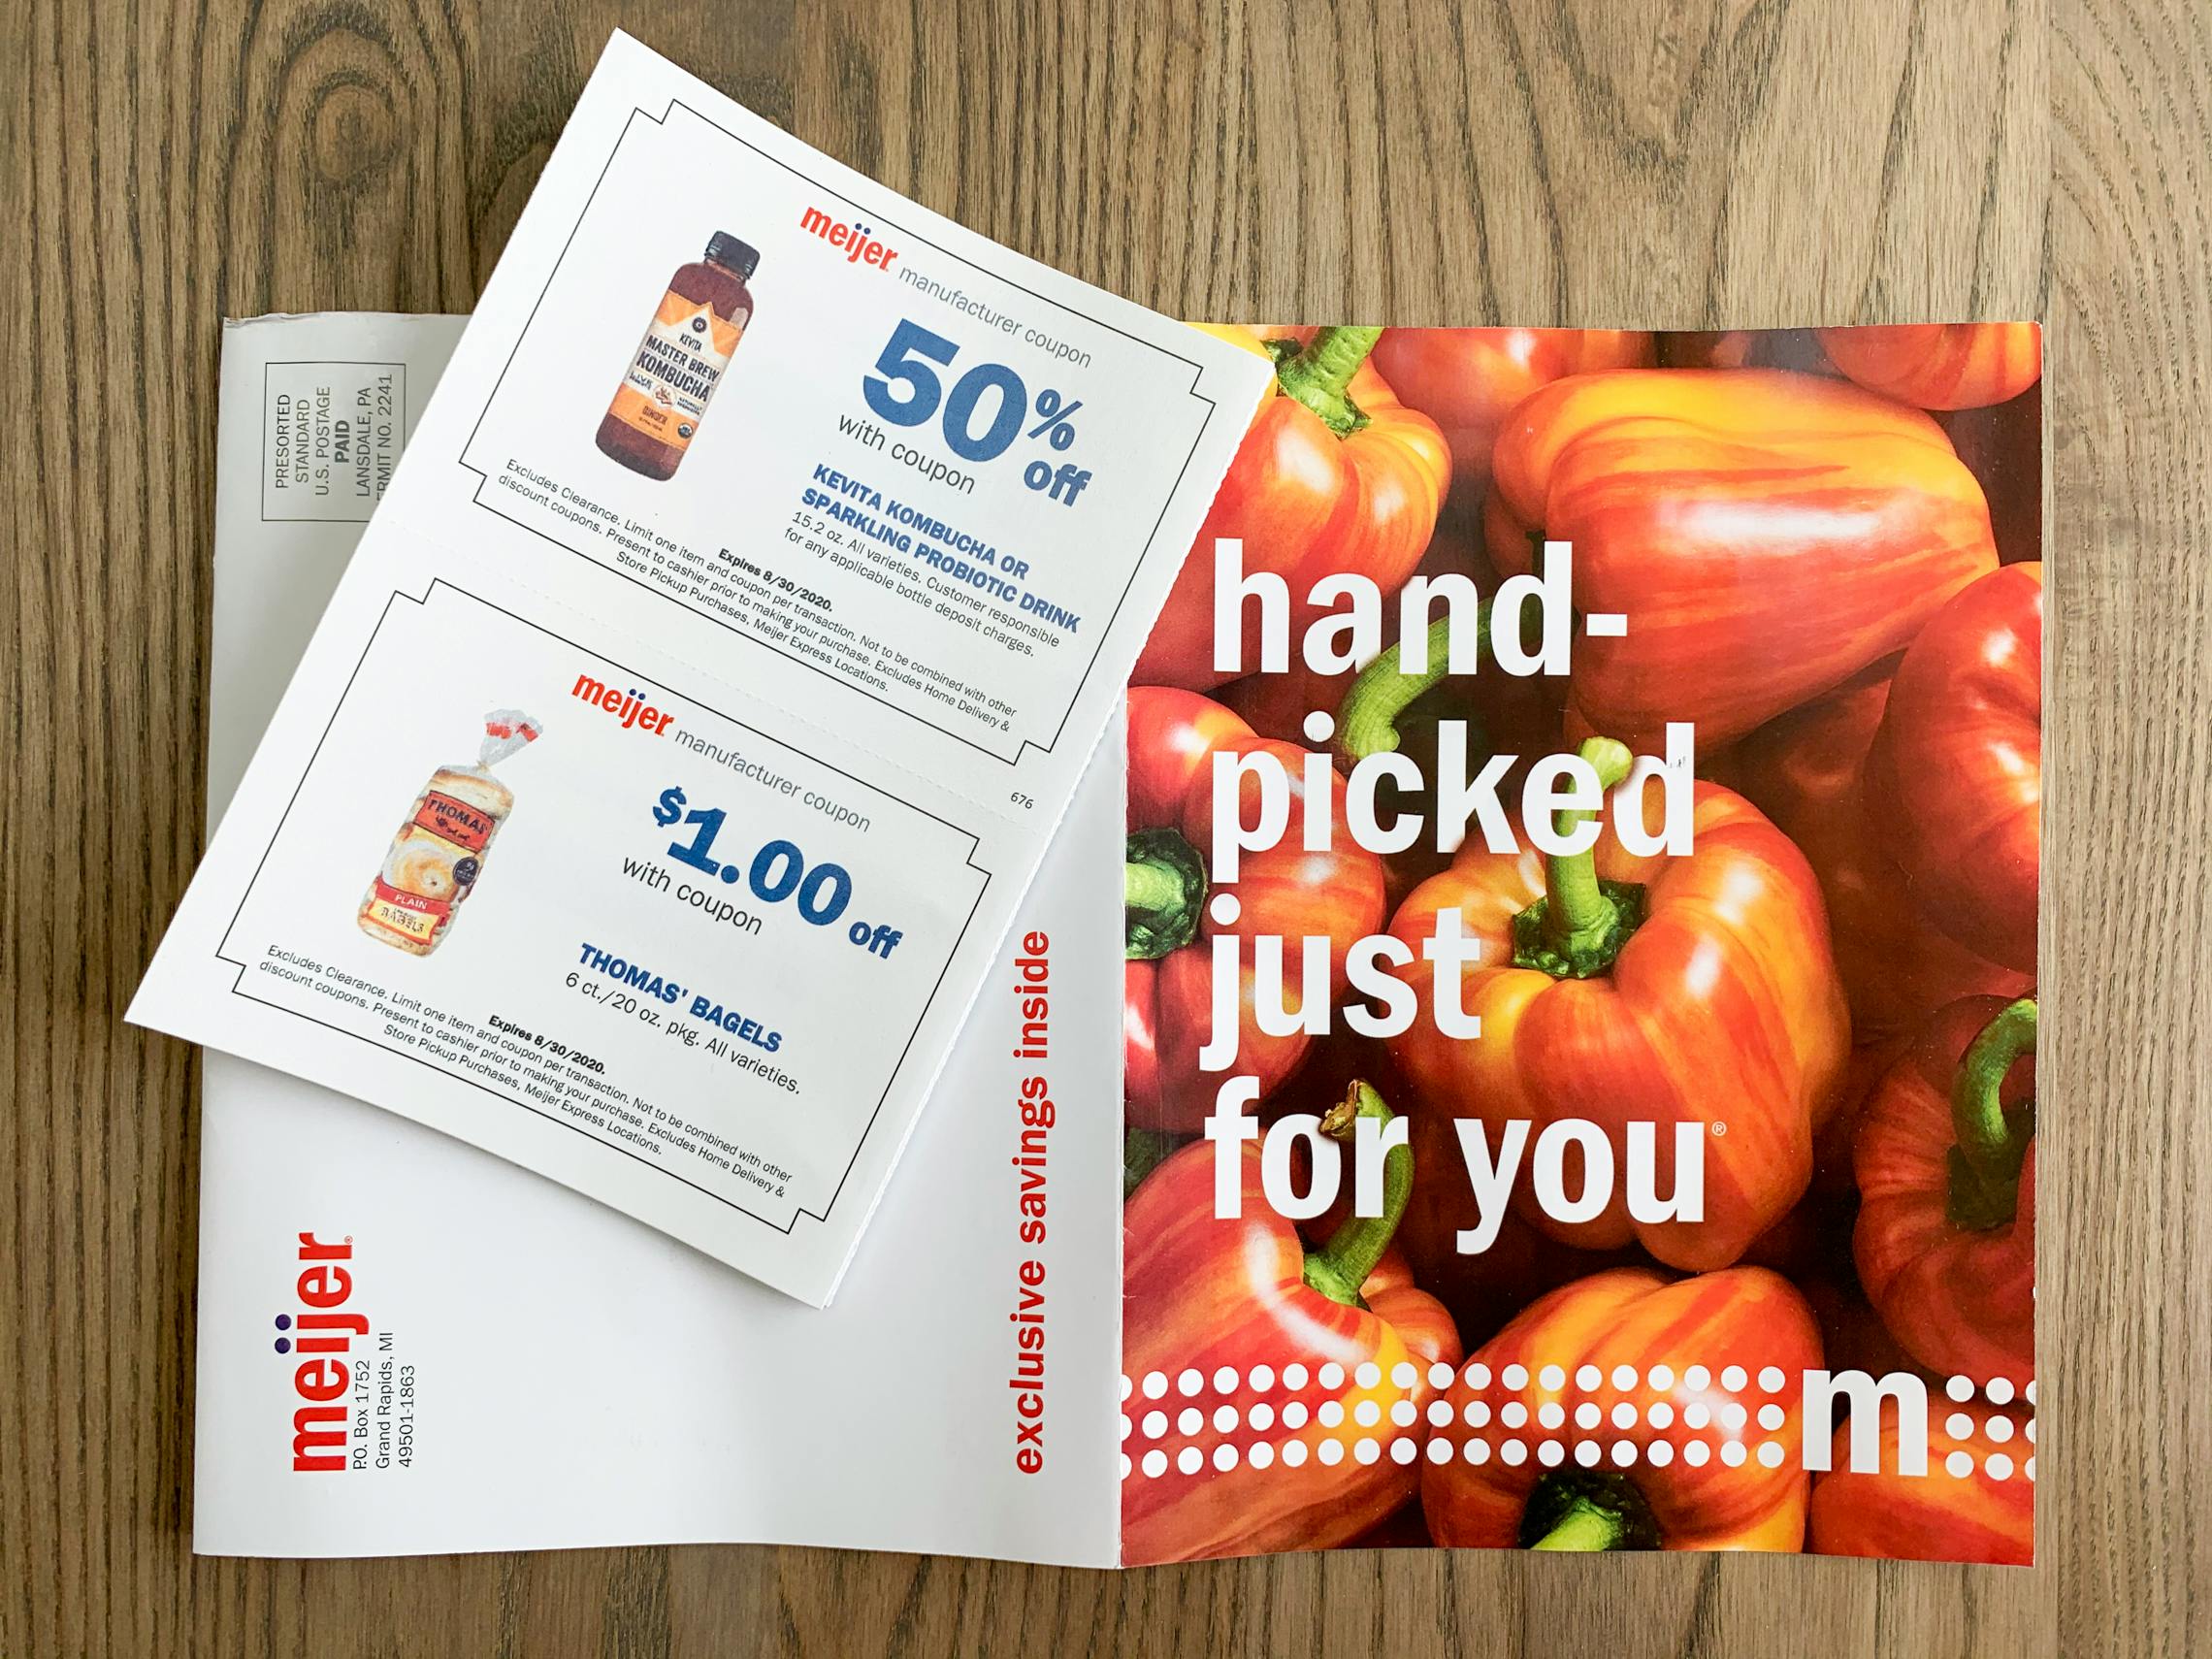 A coupon mailer from Meijer with a coupn for Thomas bagels and a coupon for Kombucha.